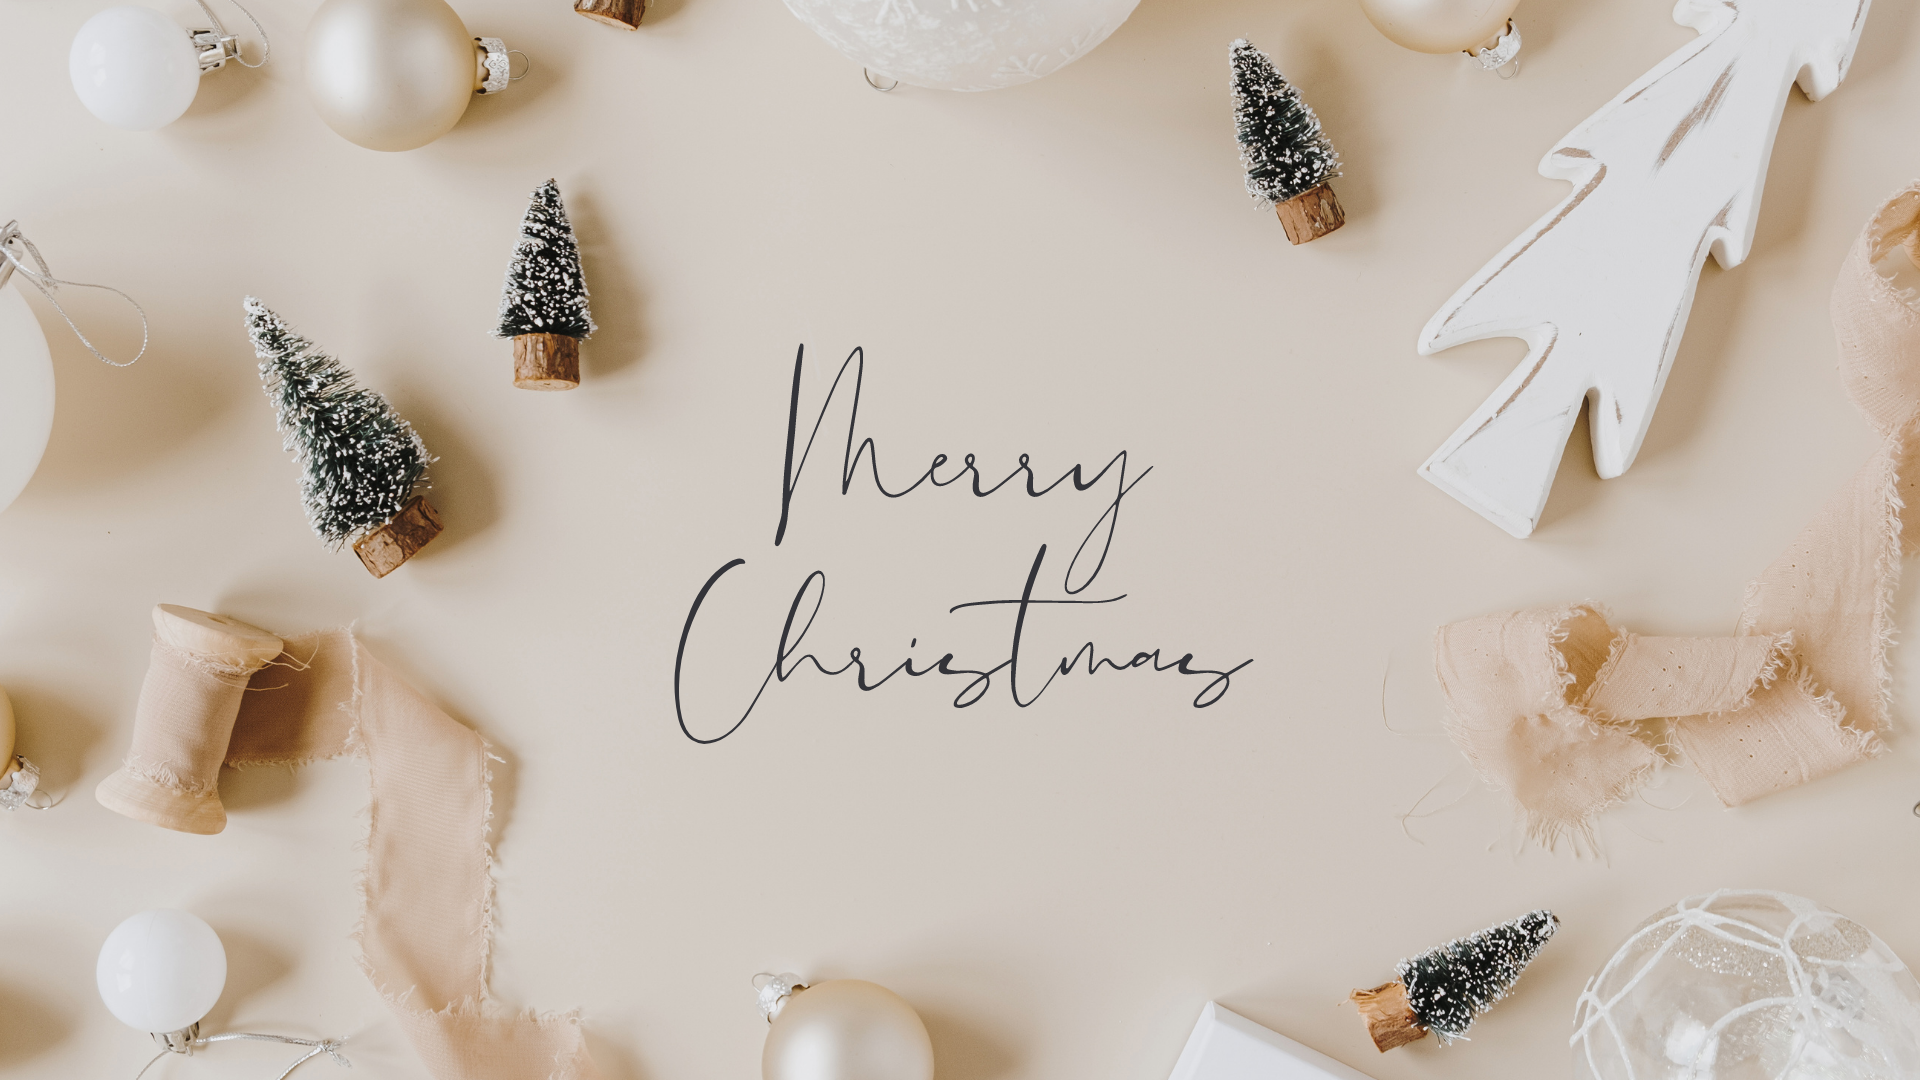 Christmas Aesthetic Wallpaper FREEBIES; Free Christmas desktop backgrounds to download and use today!